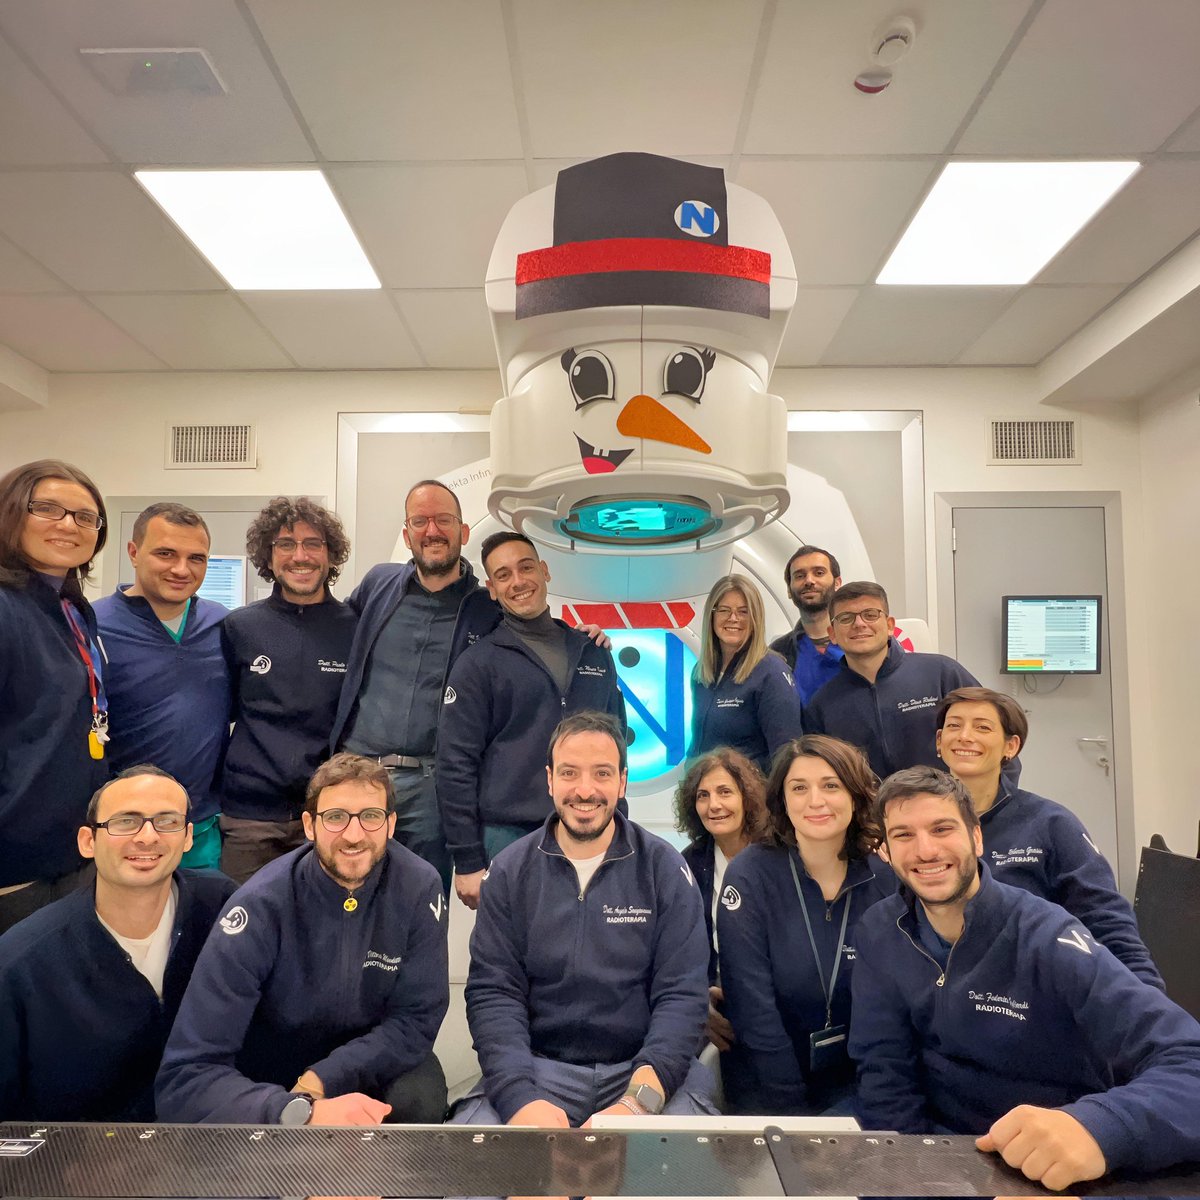 Spreading holiday cheer in the world of #radonc! 🎄 Proud of our small dream team gathered around the Linac, transformed into a #Snowball. Kudos to each one for making a difference! Our commitment remains, driven by the care we provide for our patients! @airo_young